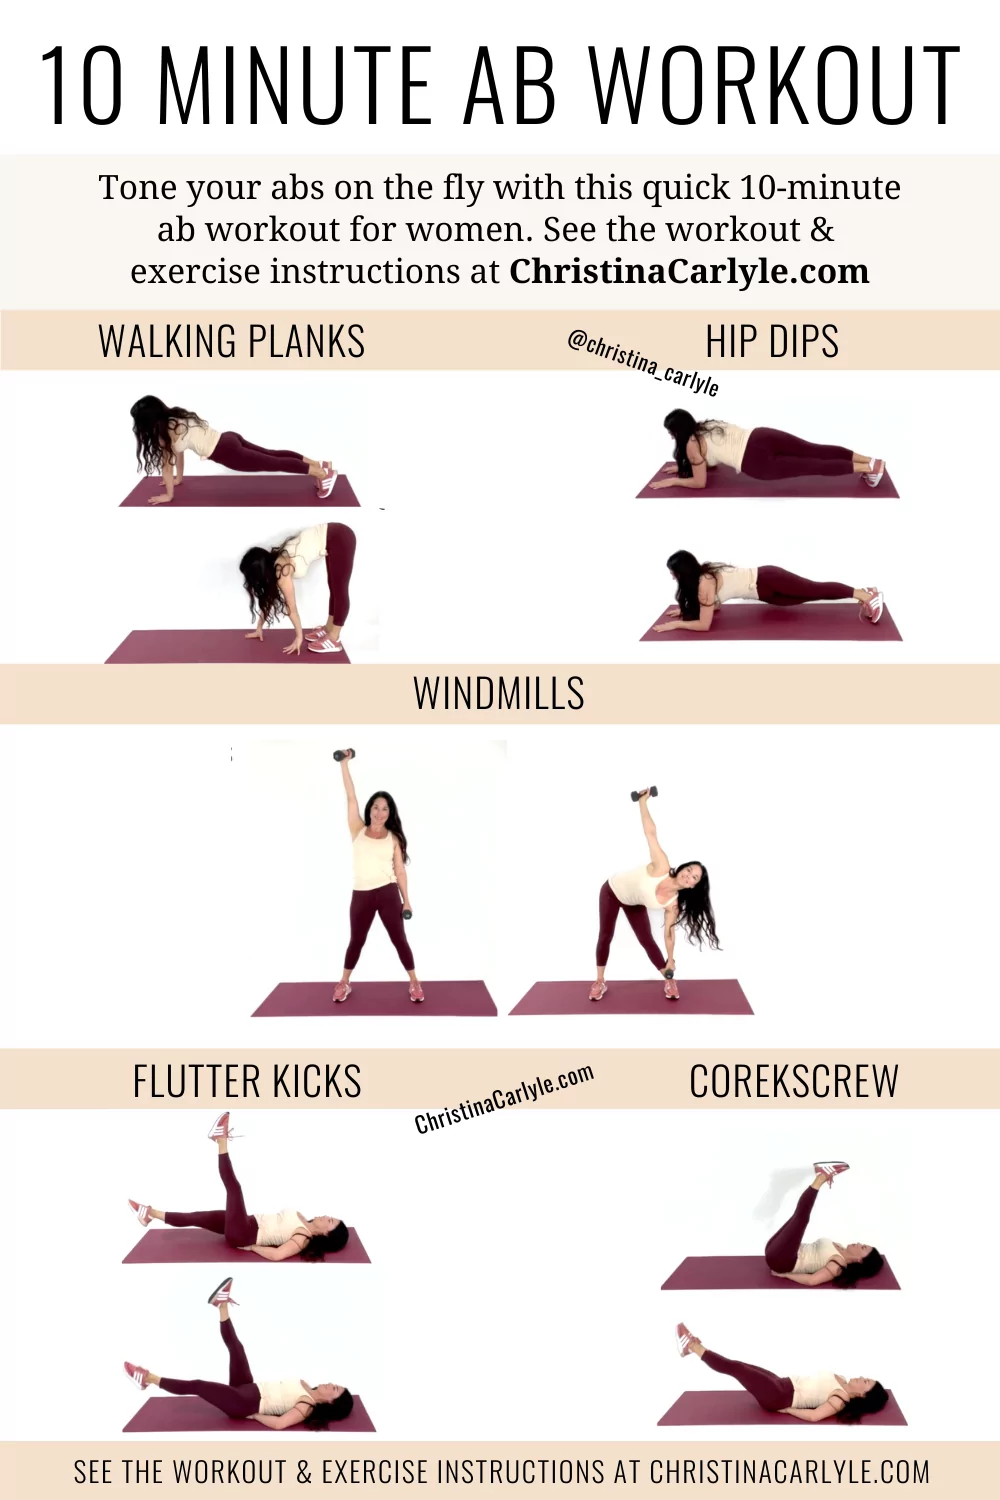 10 minute Ab Workout for a Tight, Toned Tummy ASAP - Christina Carlyle